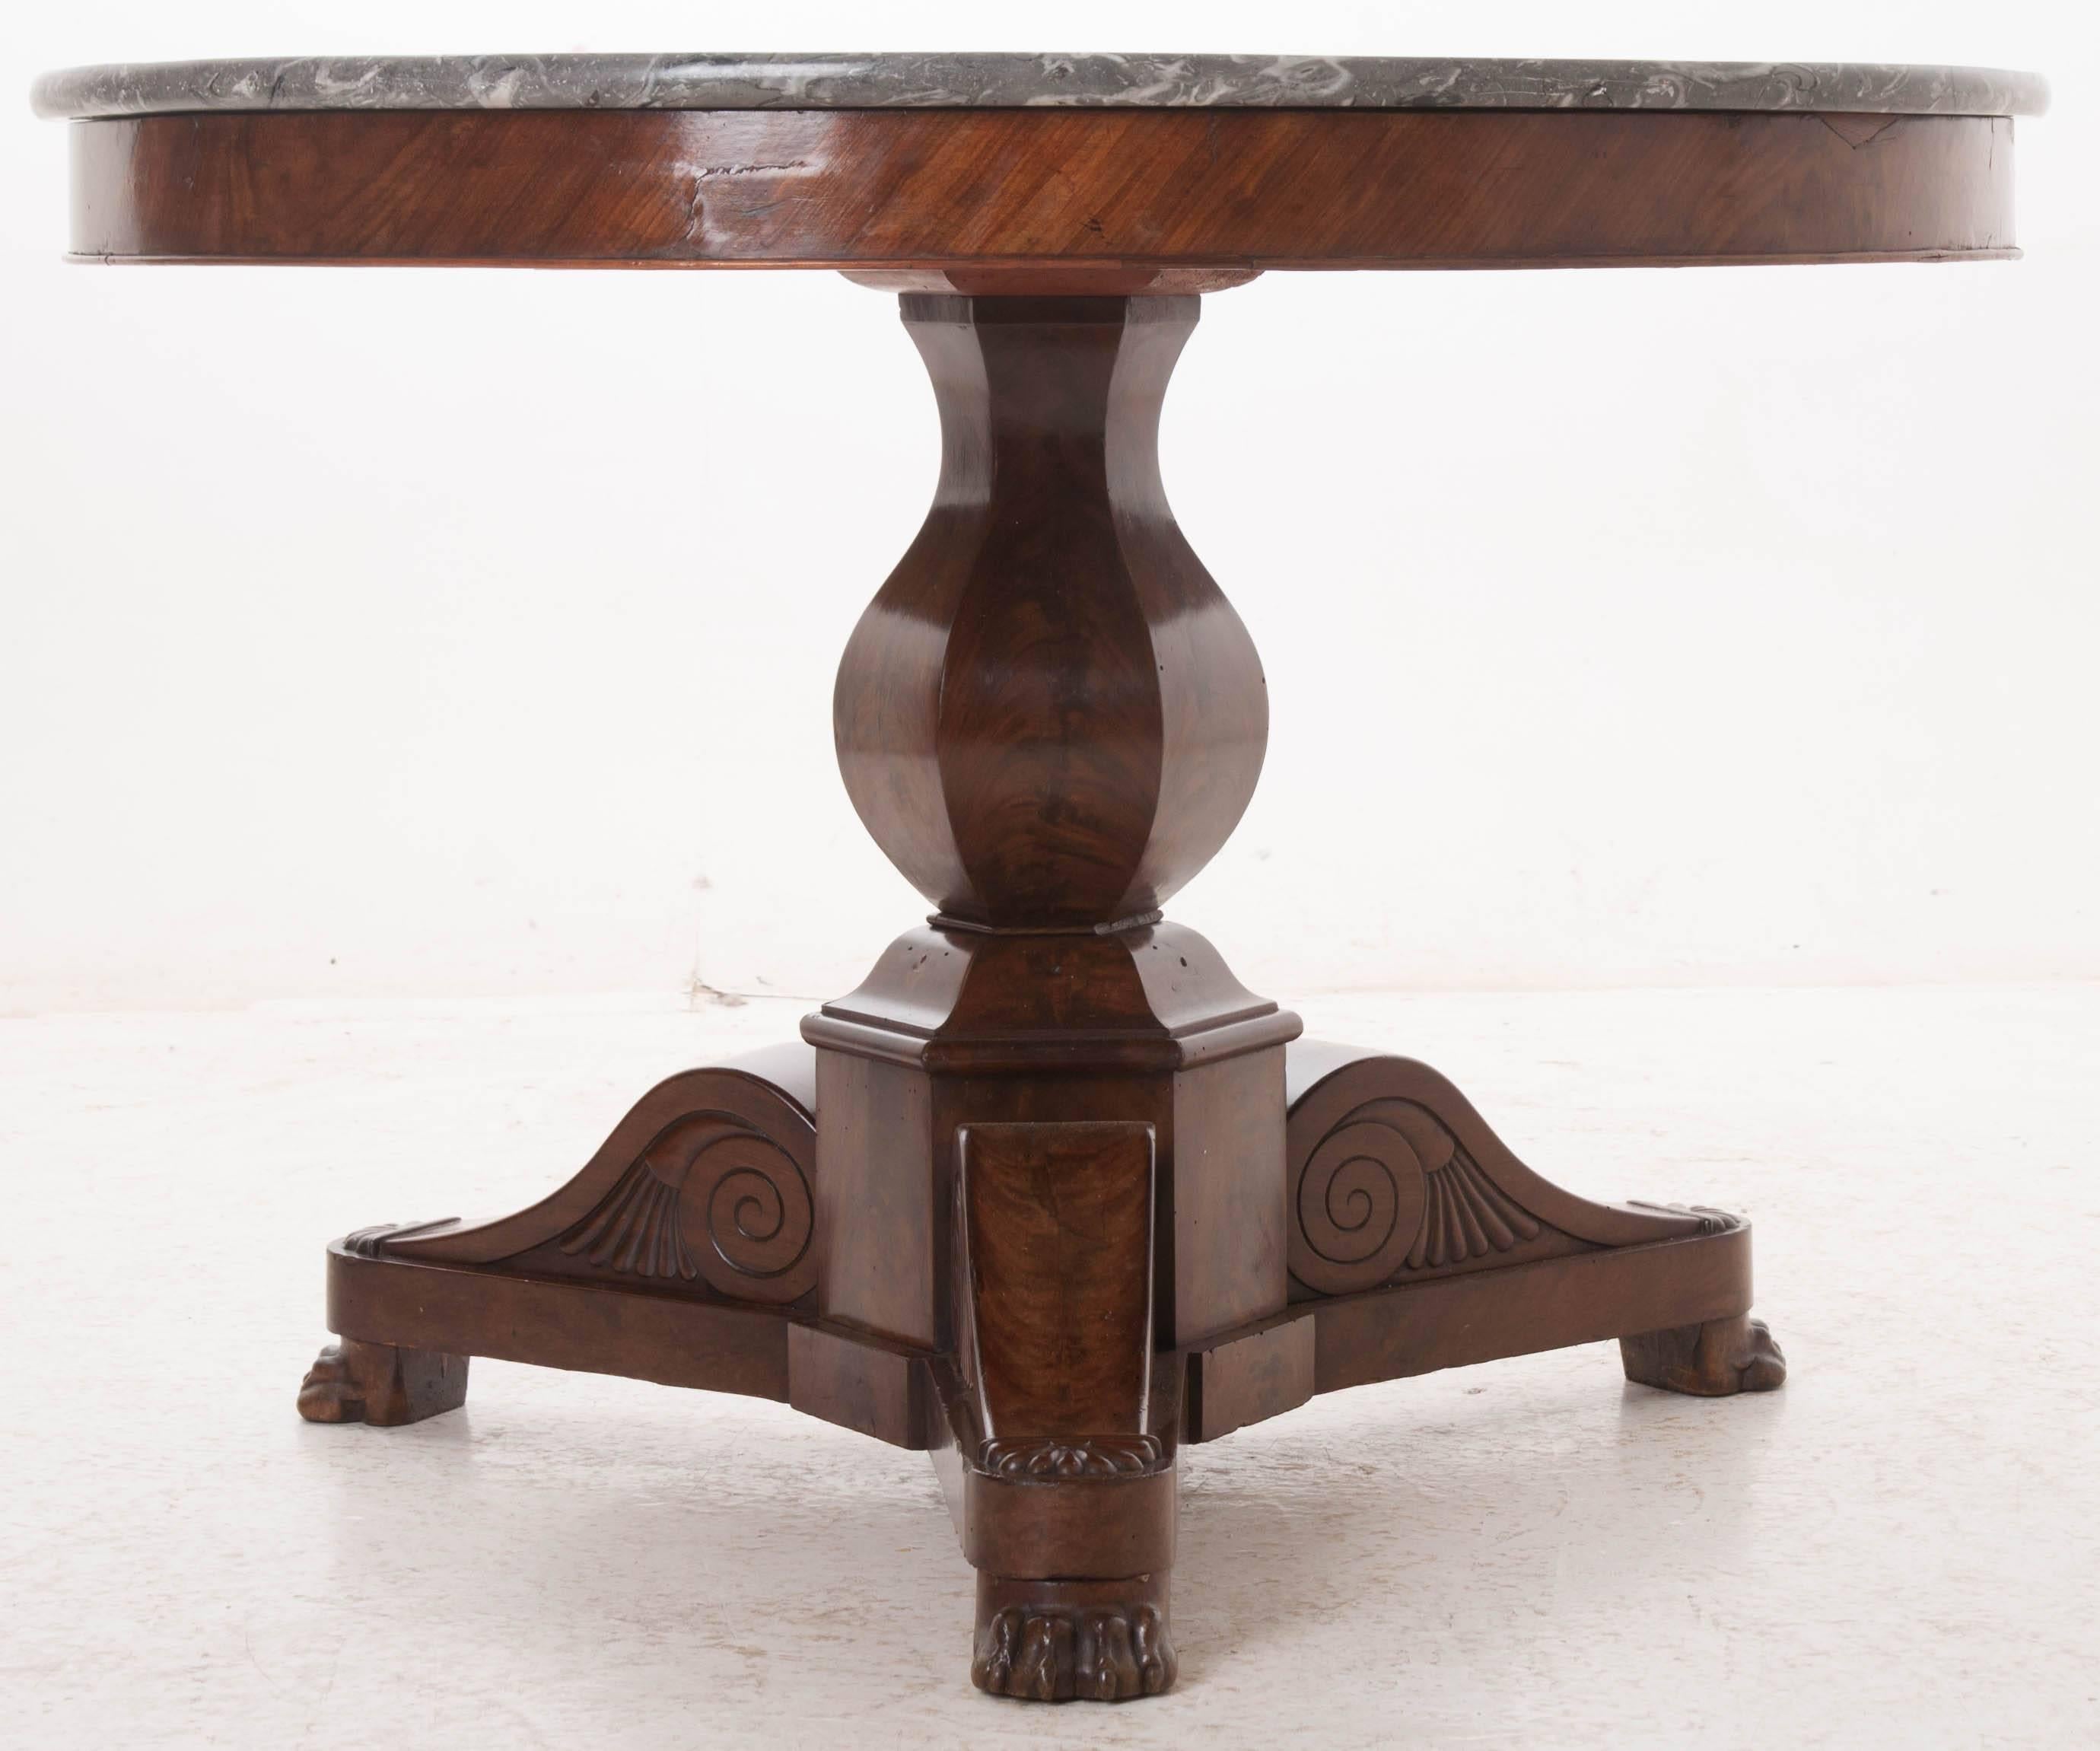 An outstanding French restauration mahogany center table with gray marble top. The marble top has a raised lip and is in excellent antique condition. The circular top rests on a mahogany tripod pedestal base with carved lion's paw feet. The base is